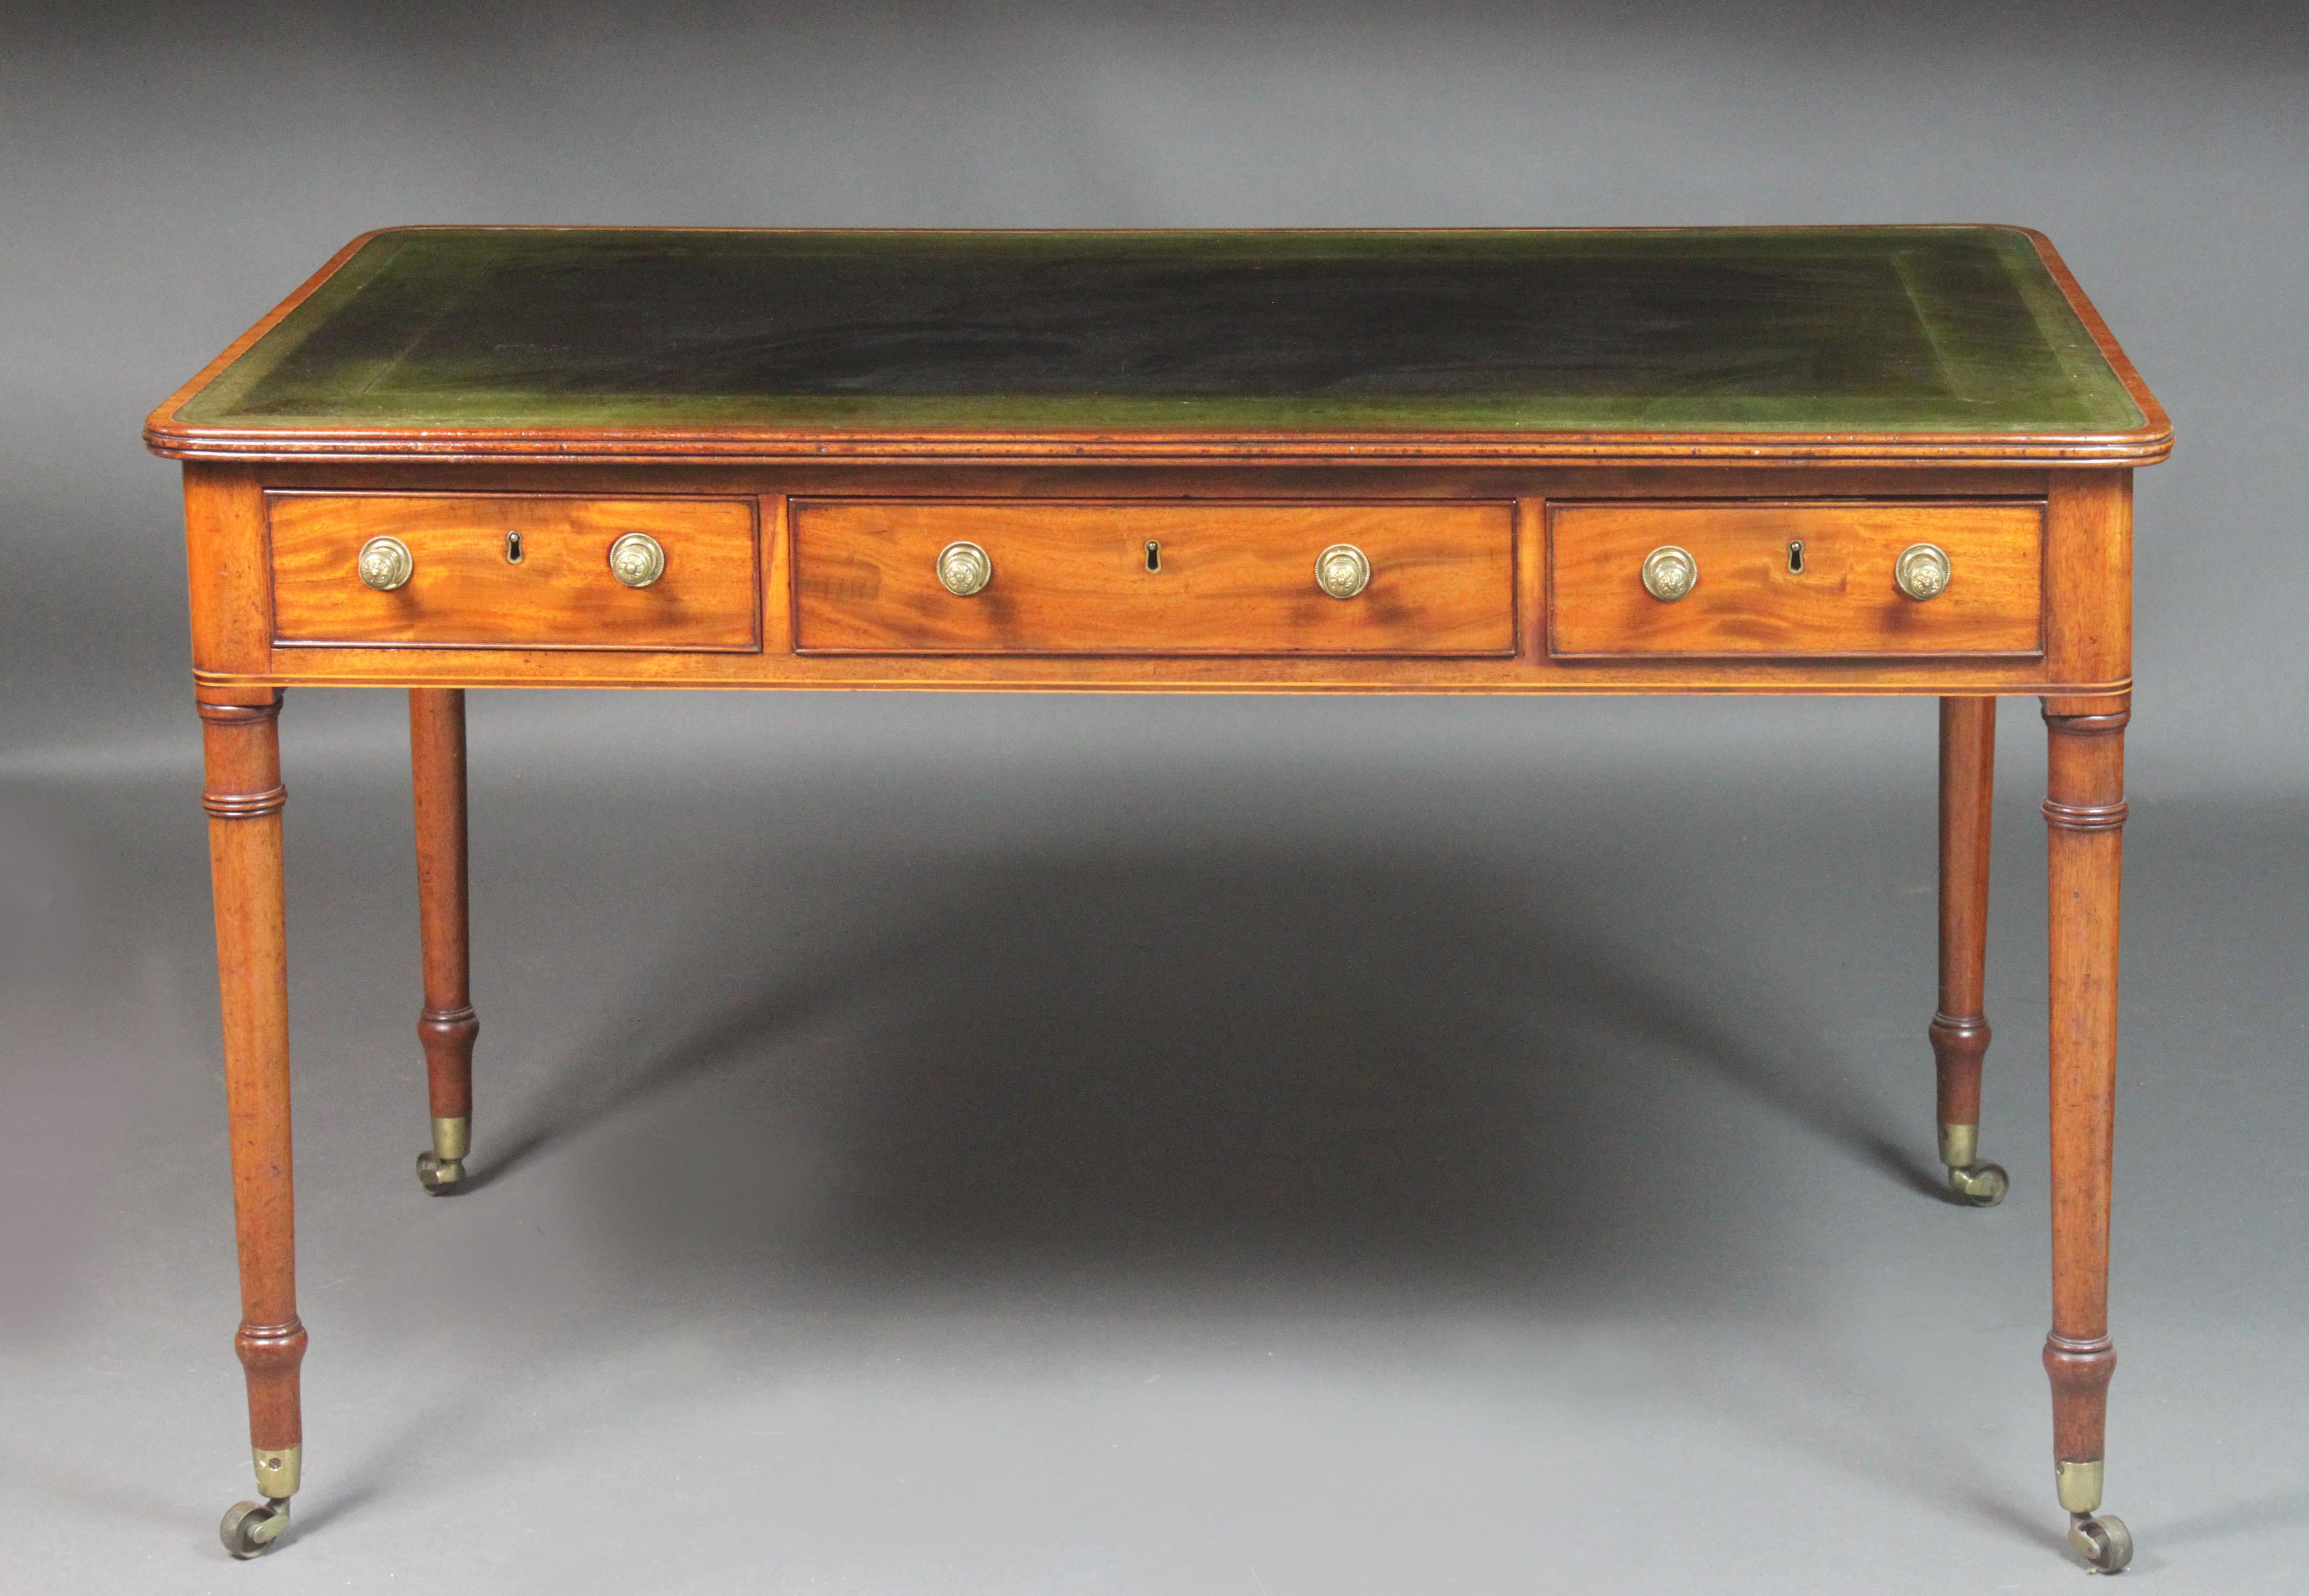 A fine George III Sheraton period partners writing table in figured mahogany with box wood stringing in the top at the edge of the leather and also in the frieze below the drawers. Elegant turned legs with Georgian castors and good quality brass